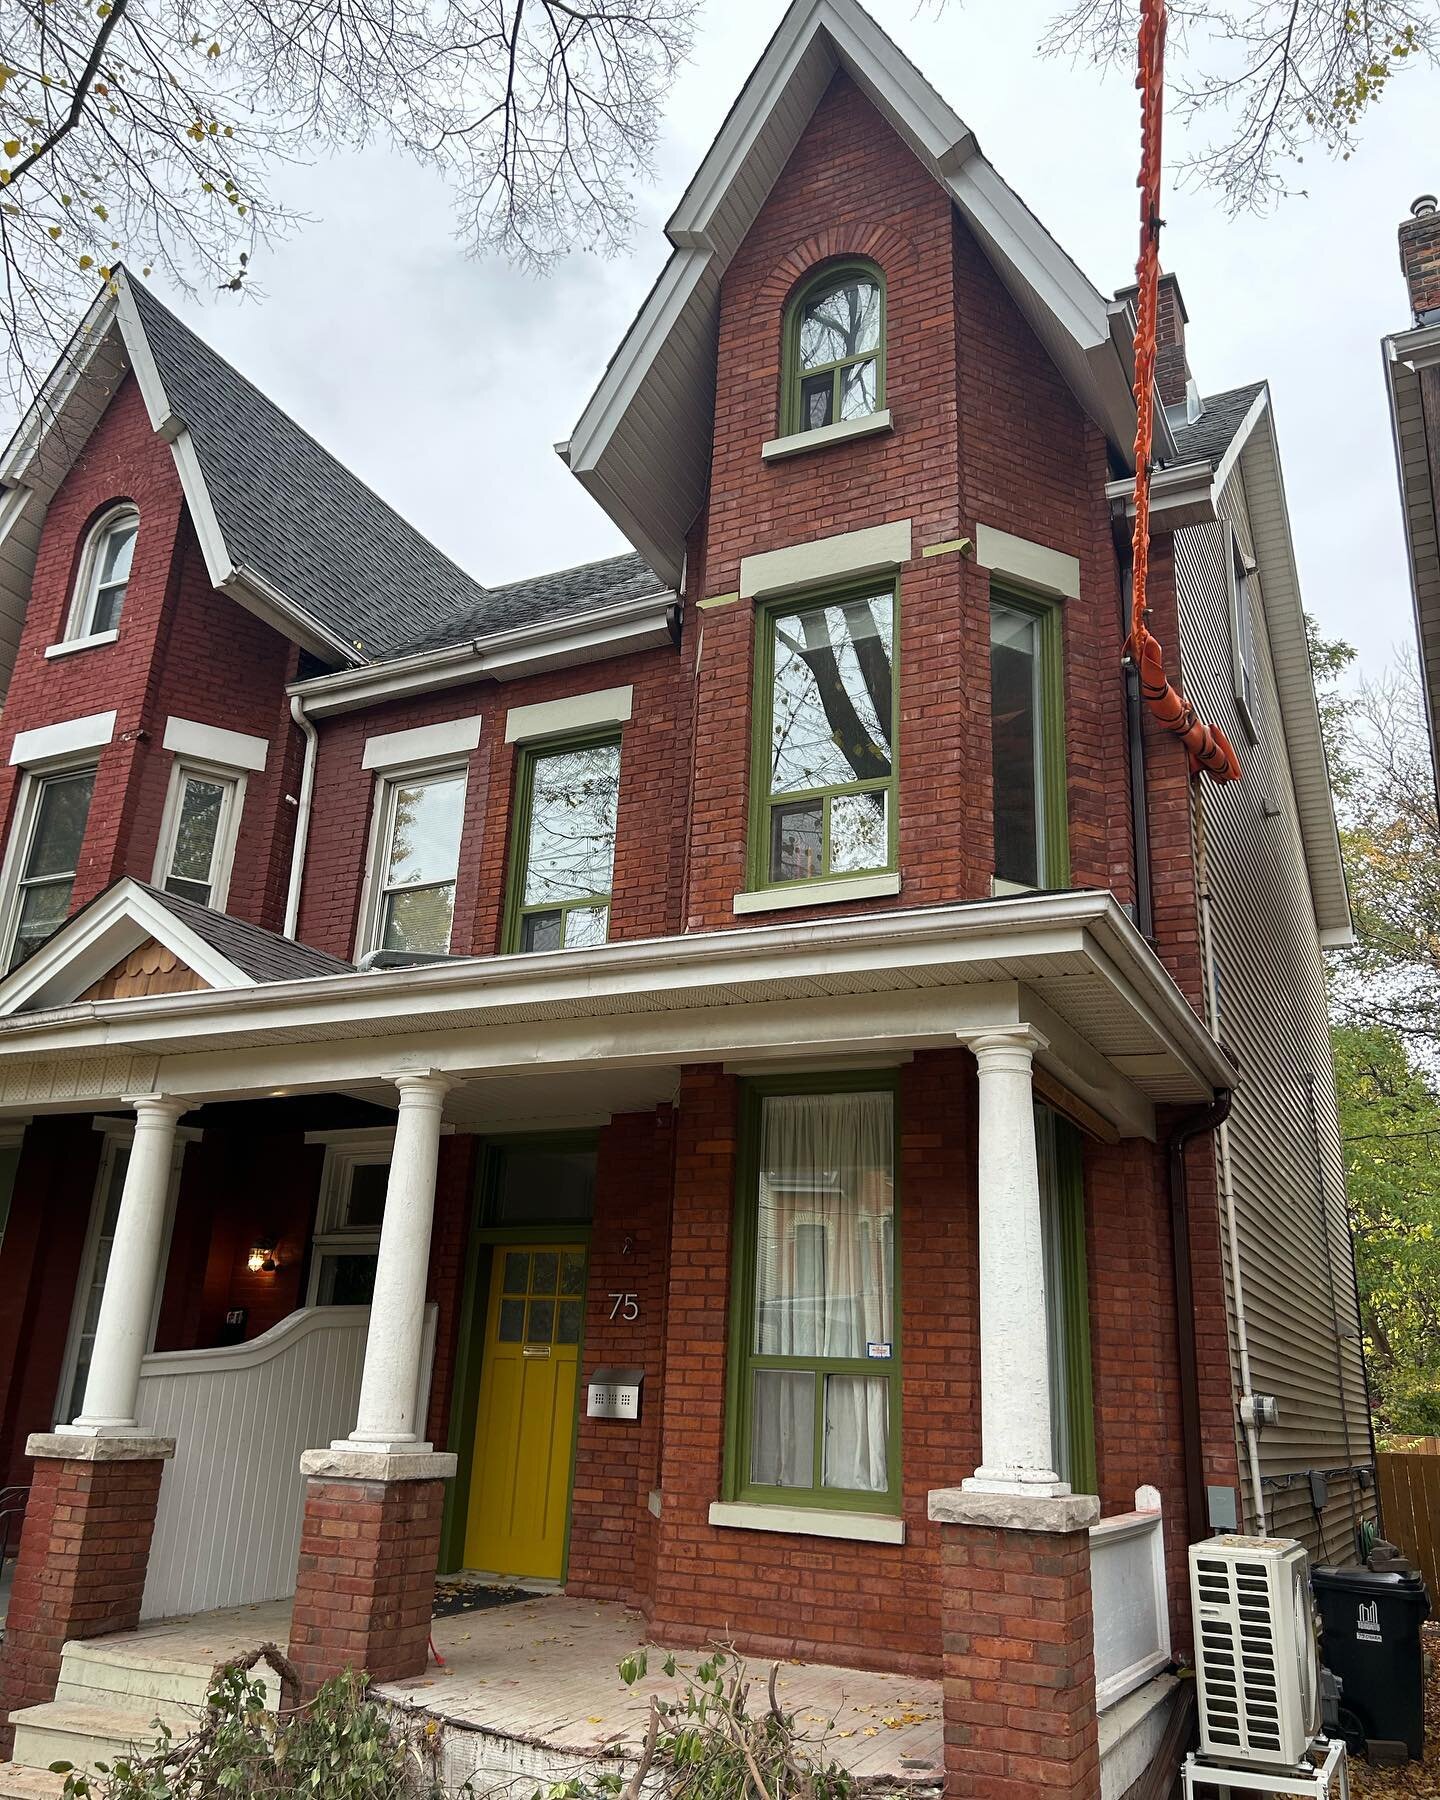 We recently completed this Victorian facade restoration project in Parkdale for some wonderful clients. 
-
Our scope of work included: non-abrasive paint removal, +200 bricks replaced and full repoint with lime mortar. 
-
Great scaffold setup by @joh